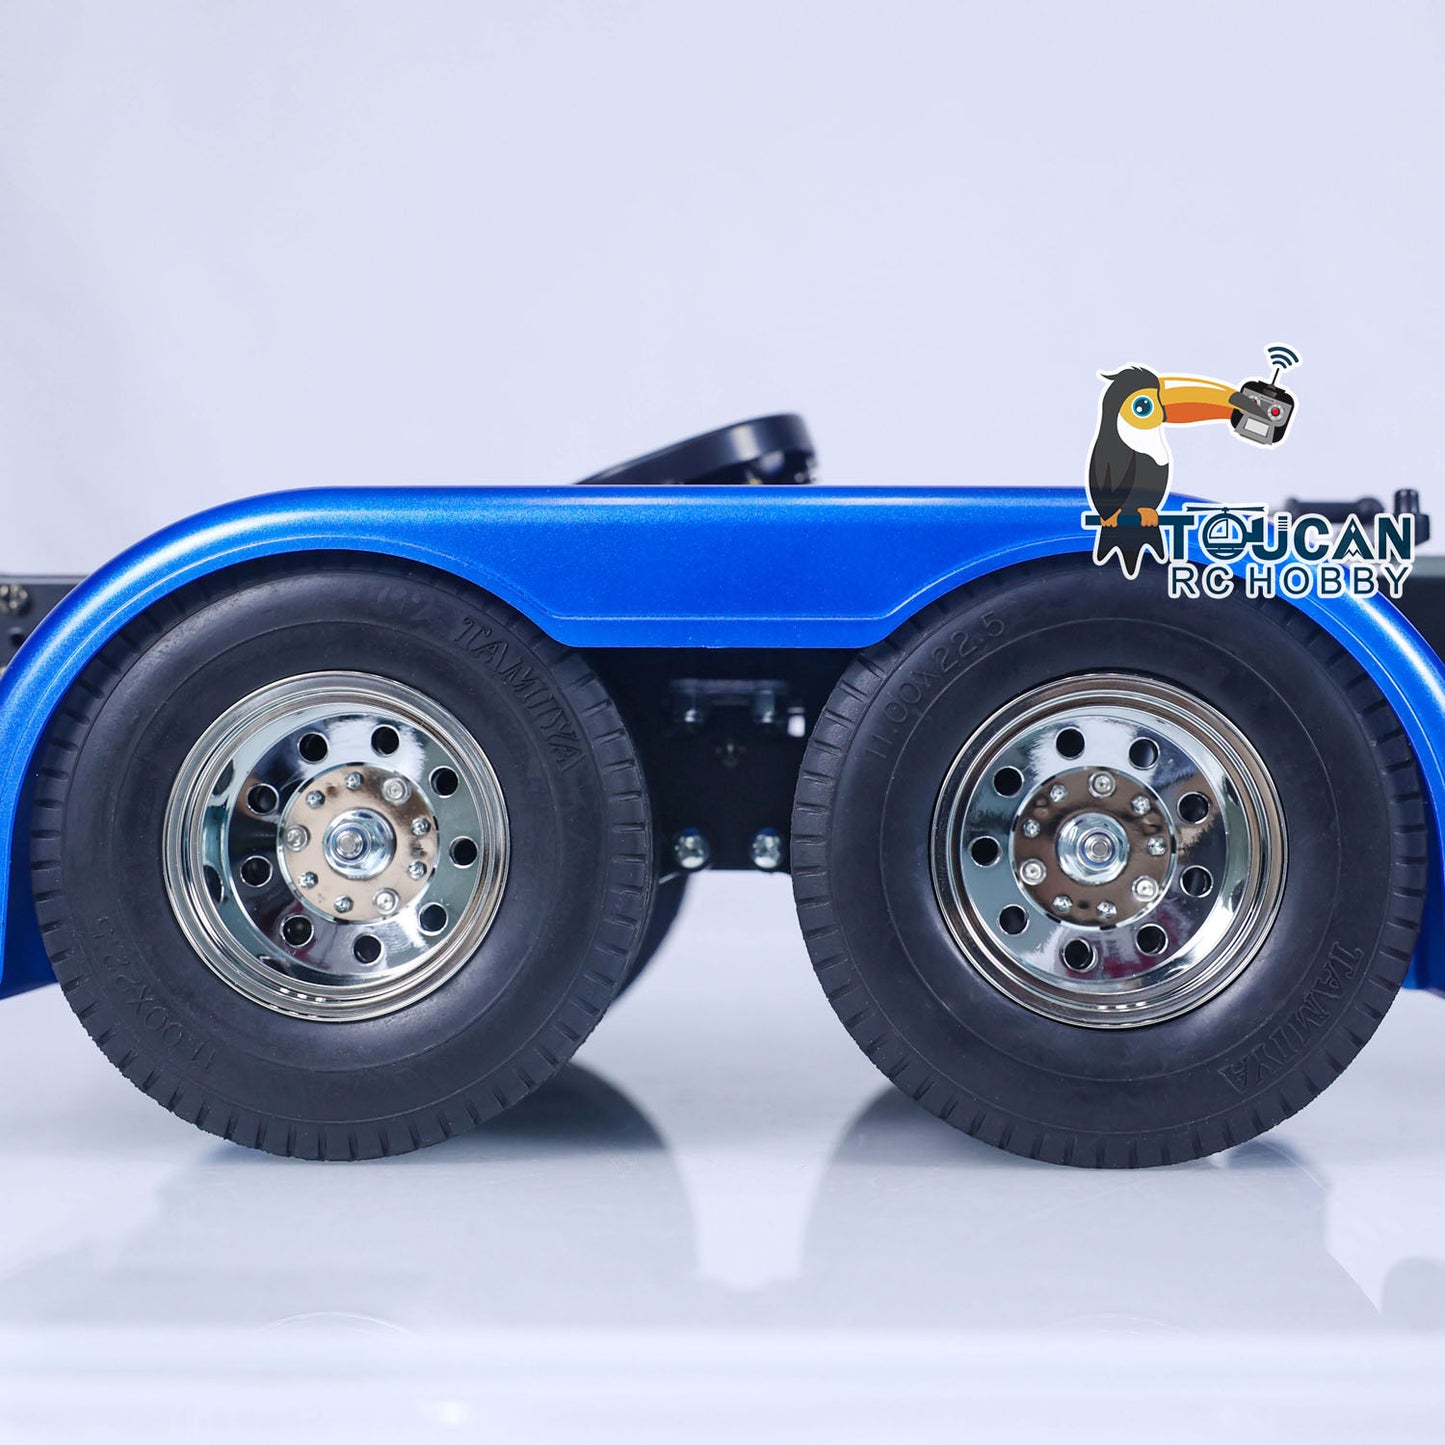 Tamiya 1/14 6*4 RC Tractor Remote Control Truck Painted Assembled Car 56344 PNP Hobby Model Motor ESC Light Sound System